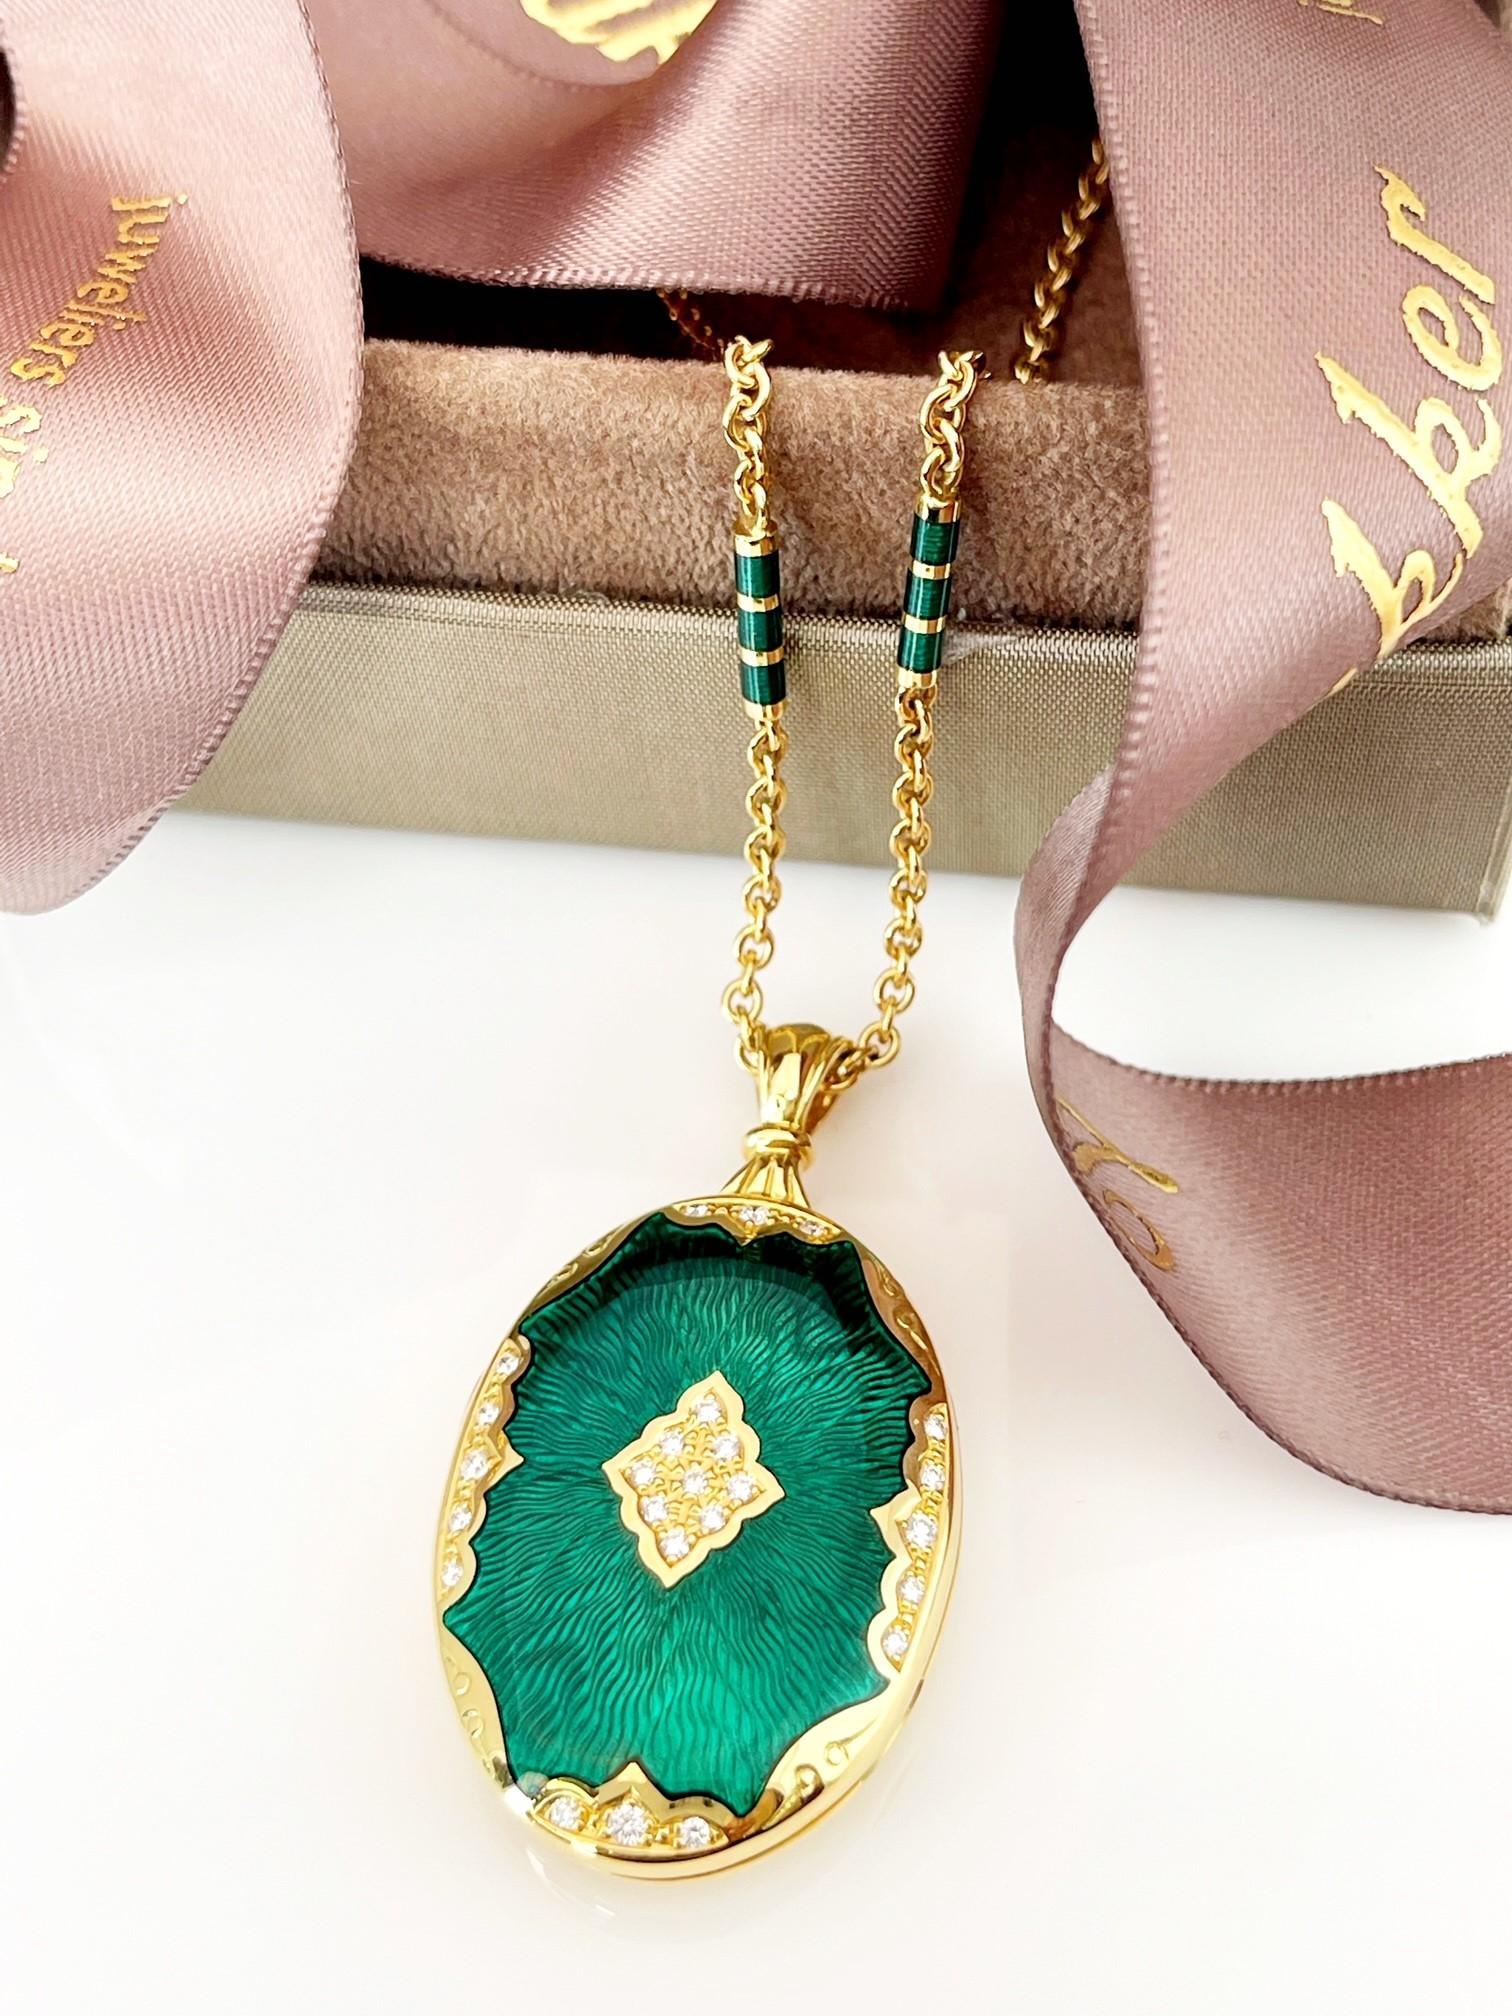 18 Karat Yellow Gold Locket with Green Ename and Diamonds on Chain with Enamel For Sale 1